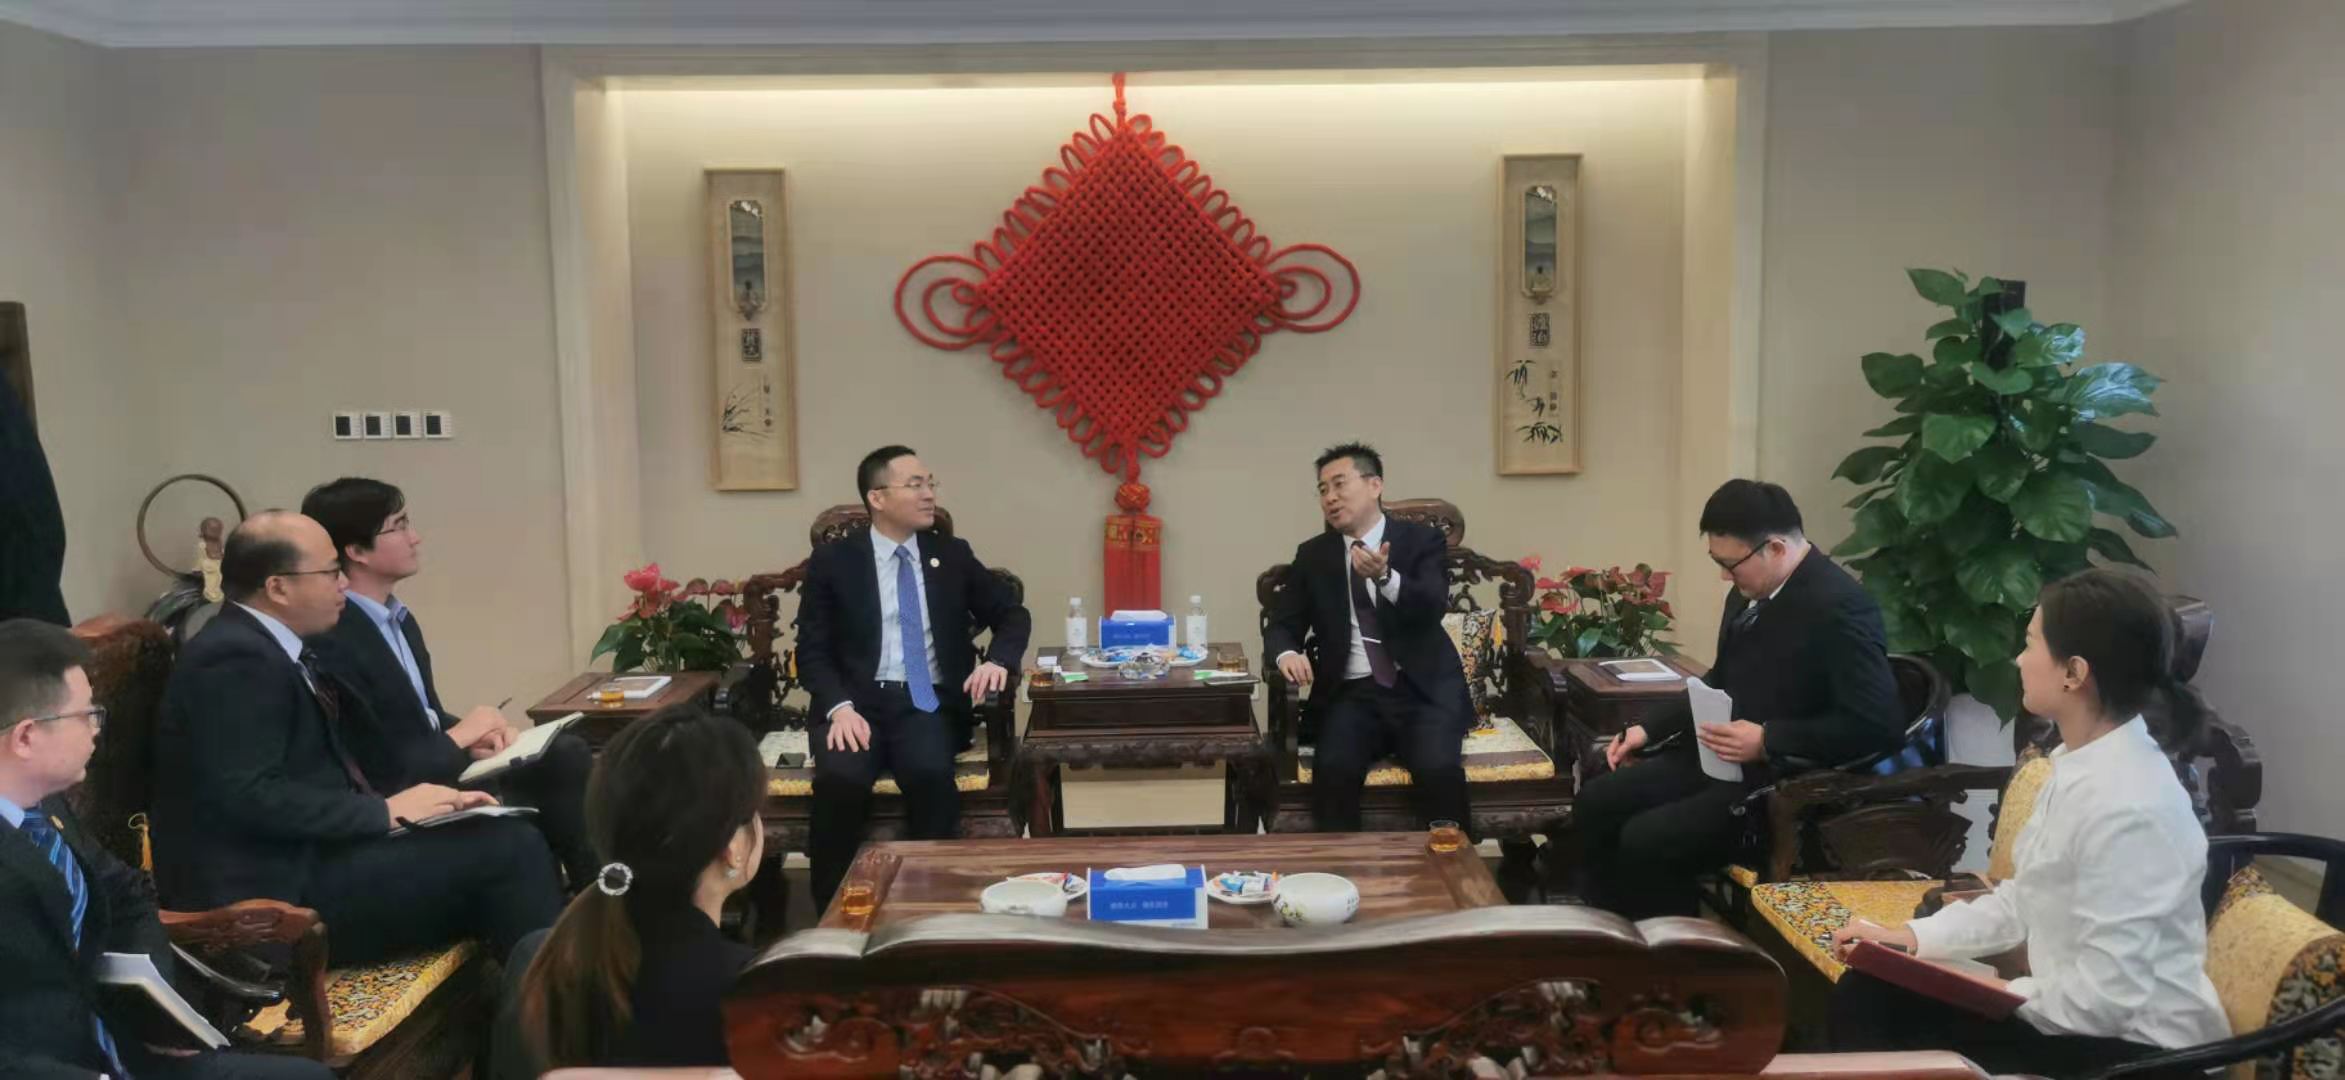 Tianjin Branch of Minsheng Bank and Juncheng Pipeline Industry Group have carried out cooperation and exchange